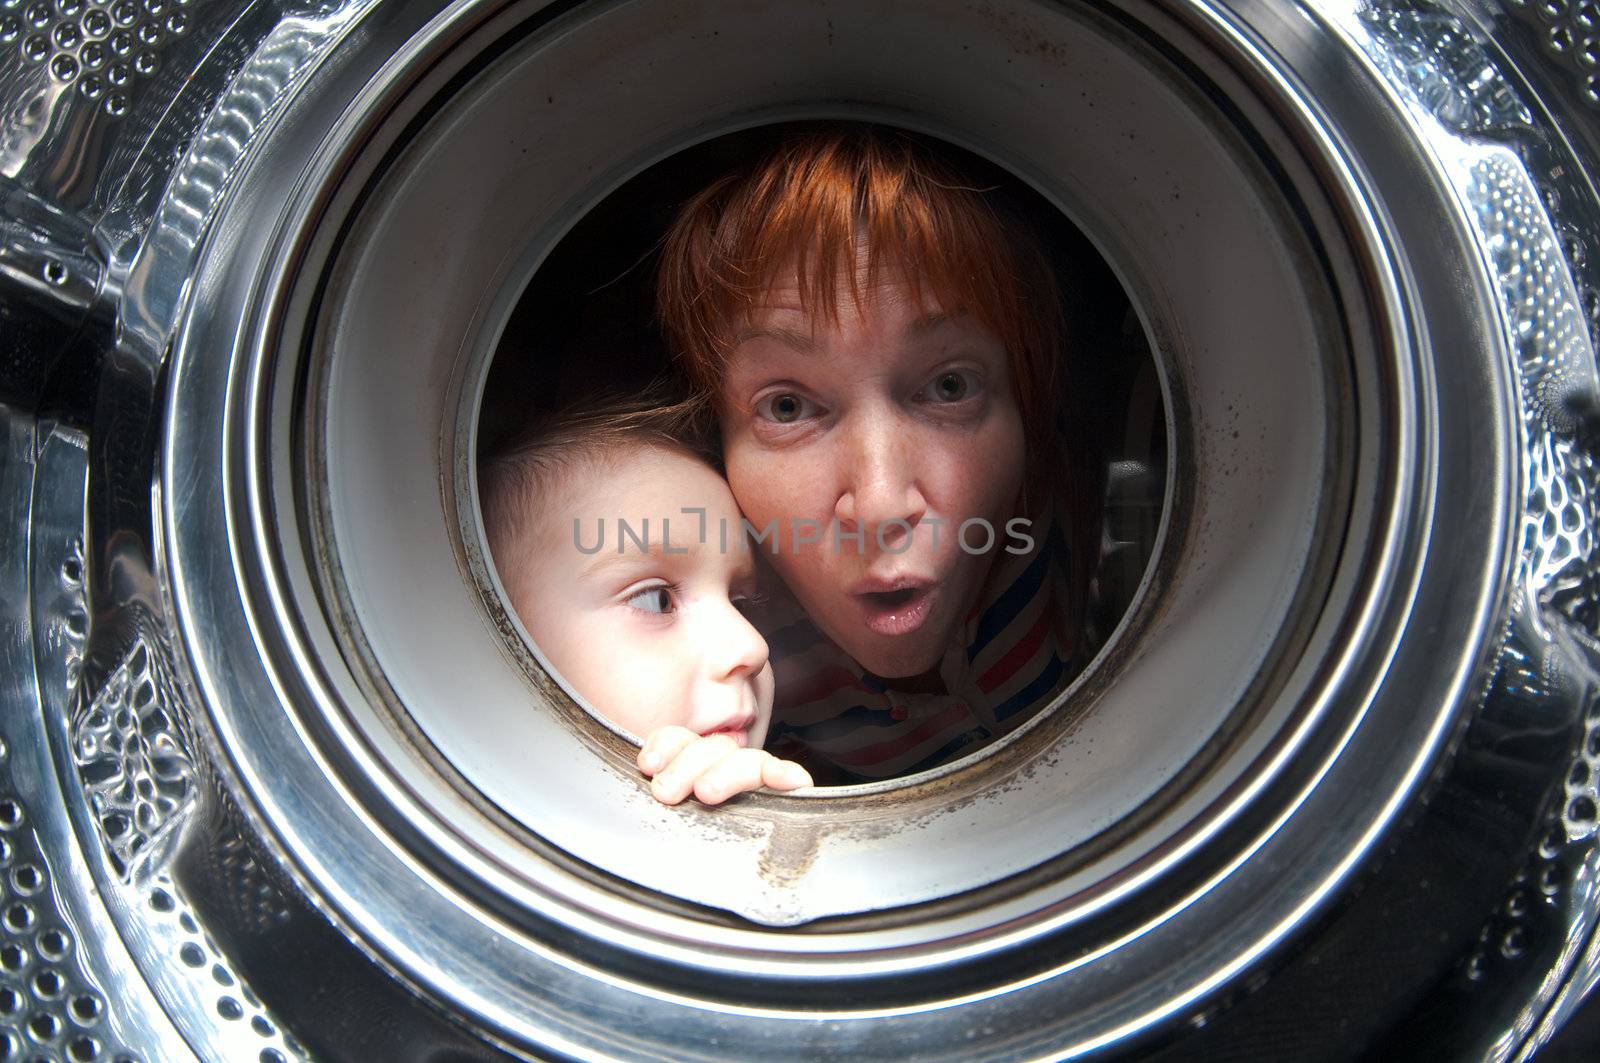 woman and boy peer into get old washer 